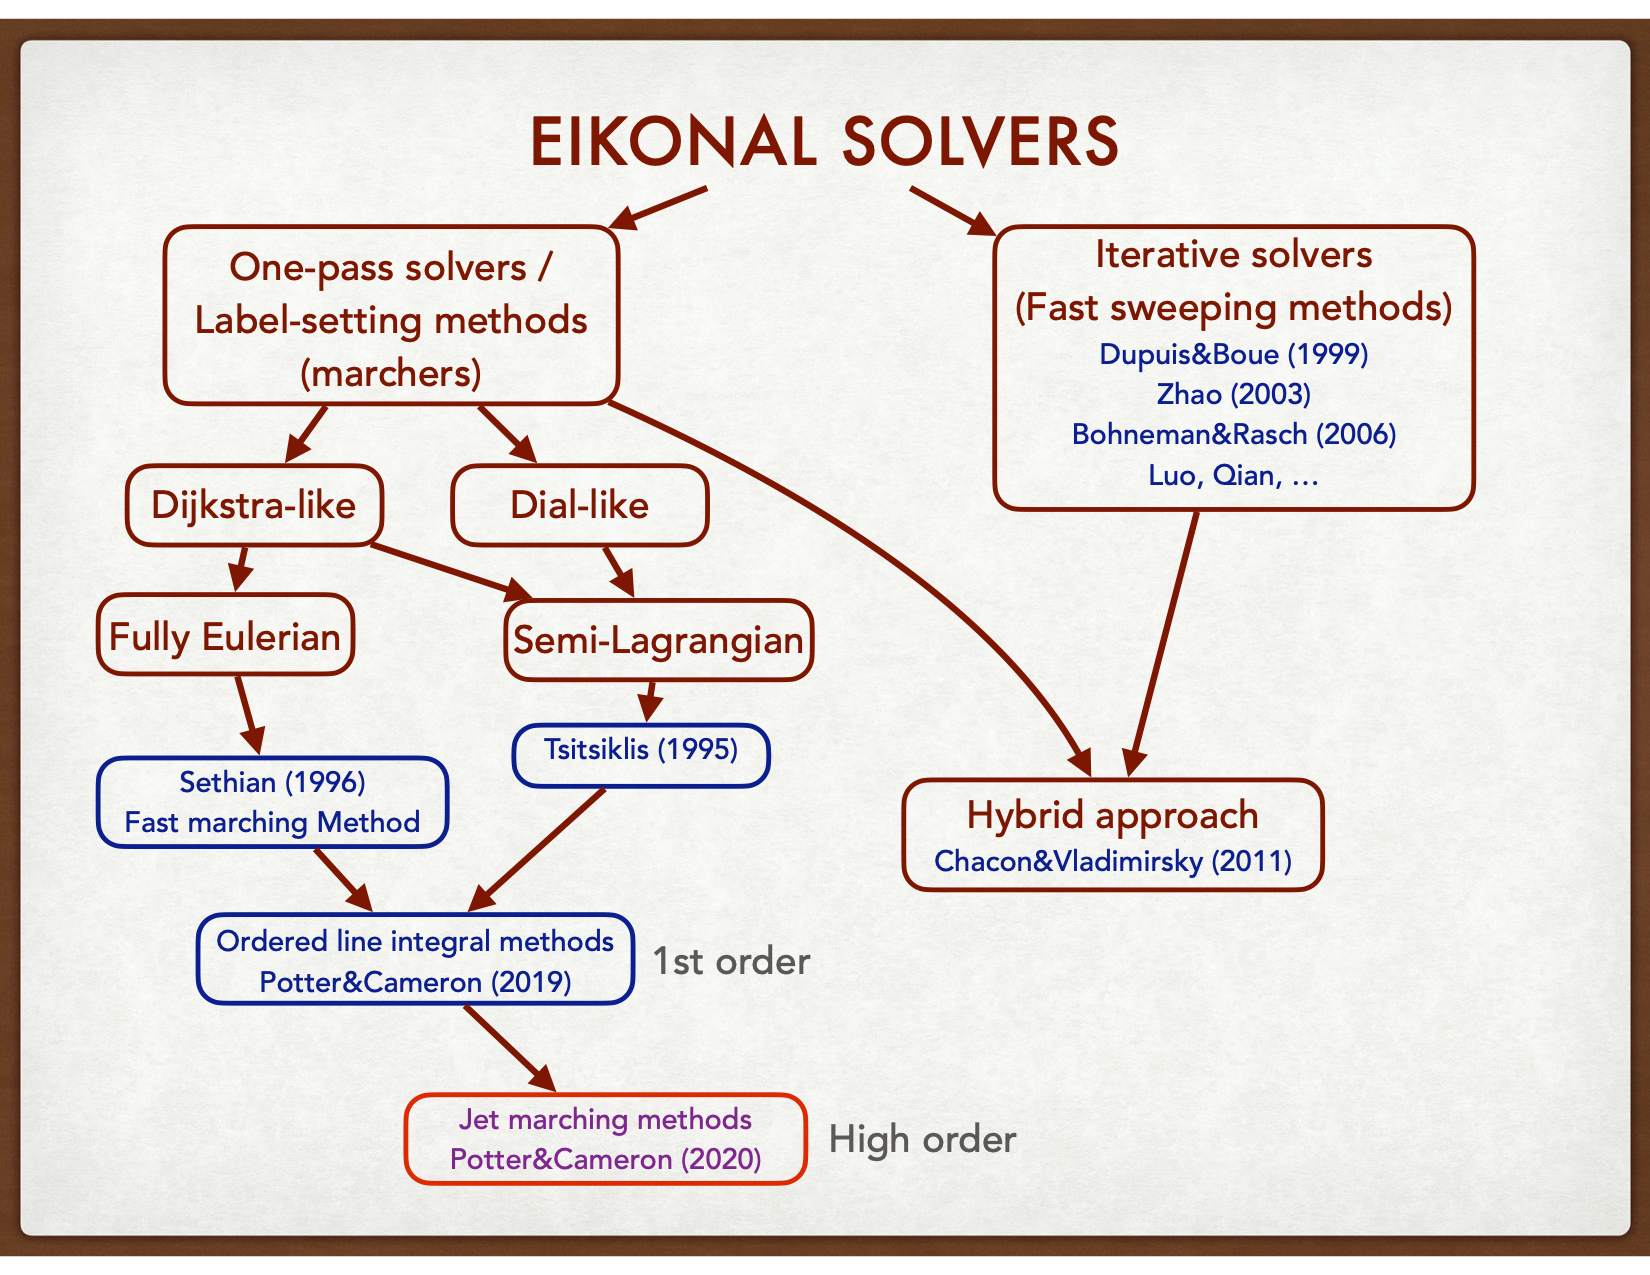 Classification of eikonal solvers